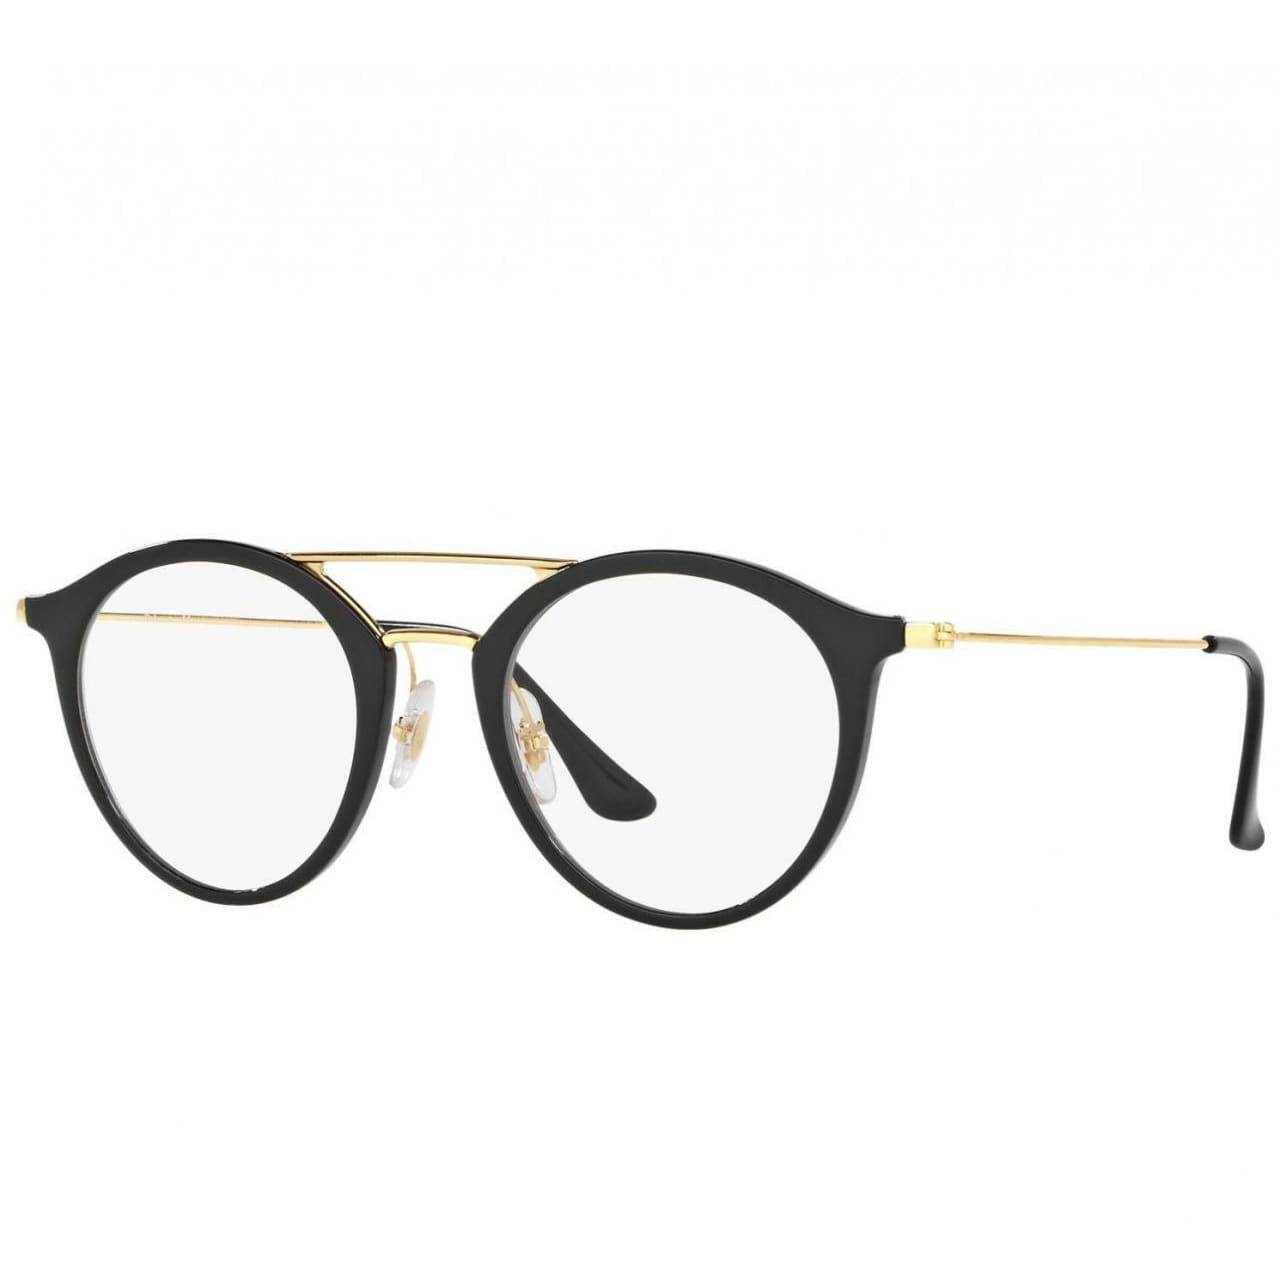 Ray-Ban RB7097-2000 Black Gold Round Injected Eyeglasses Frames 8053672603613